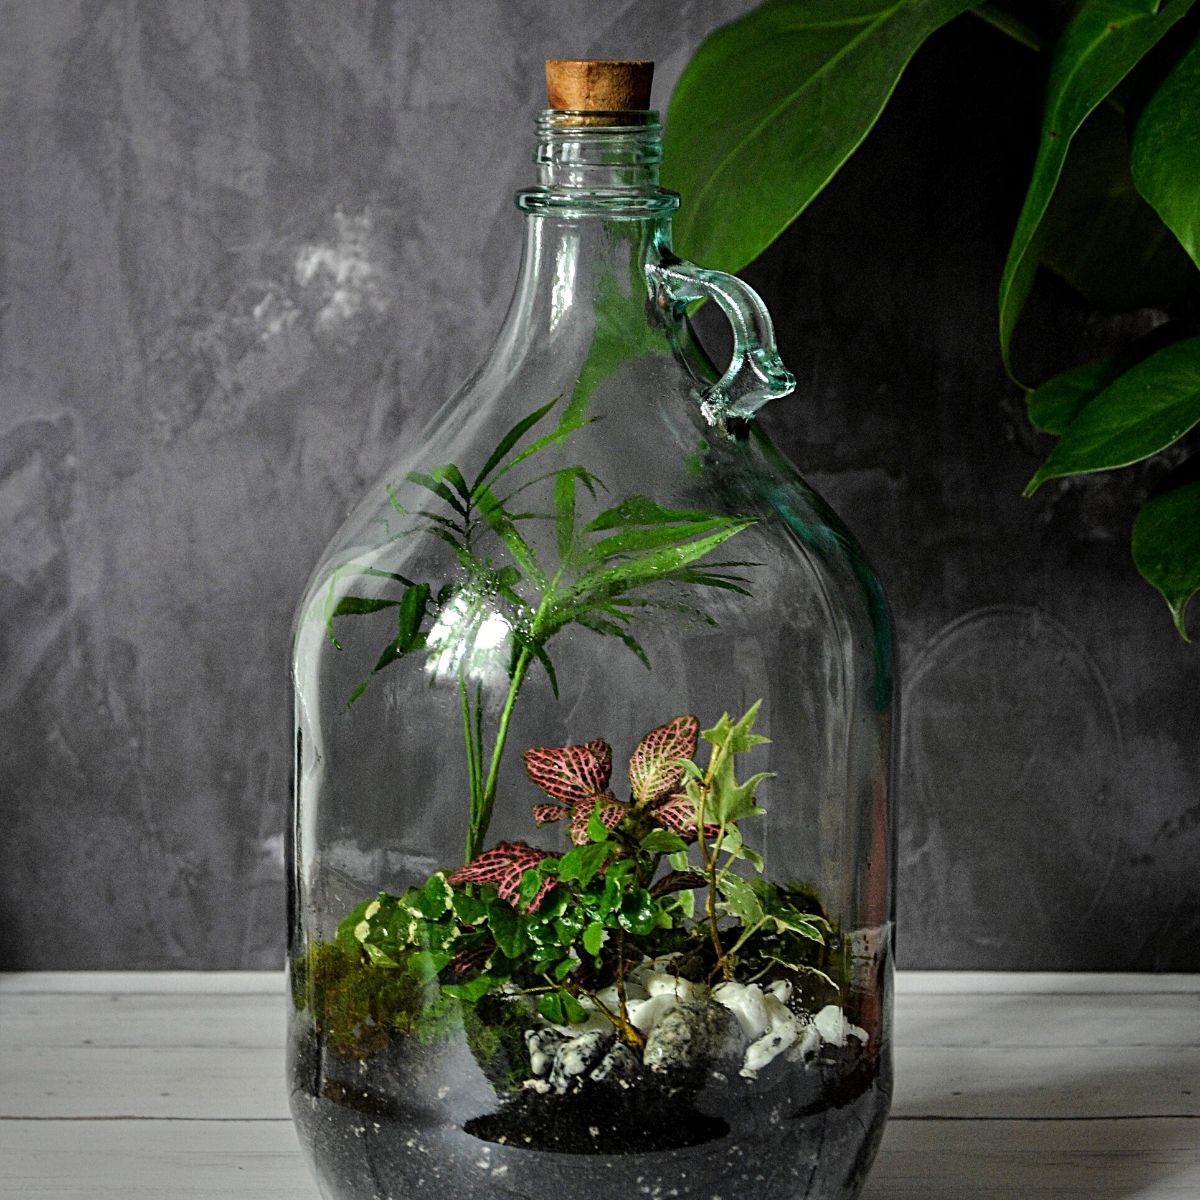 Nerve plants in a glass jar